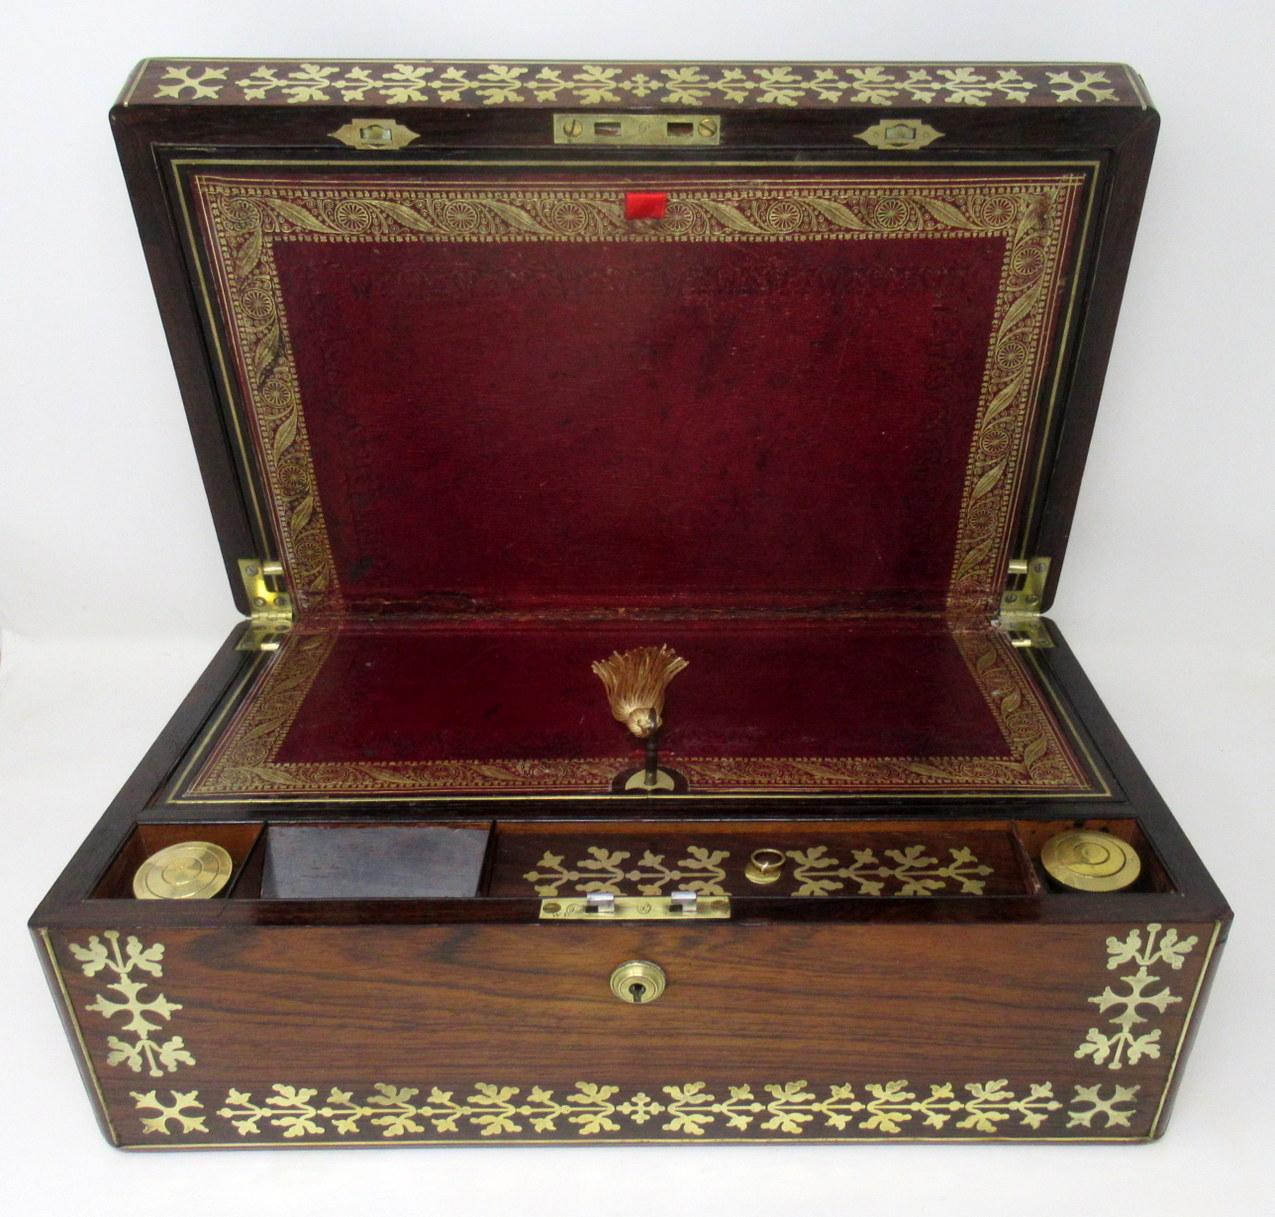 English Antique Regency Brass Inlaid Mahogany Traveling Desk Wooden Writing Slope Box For Sale